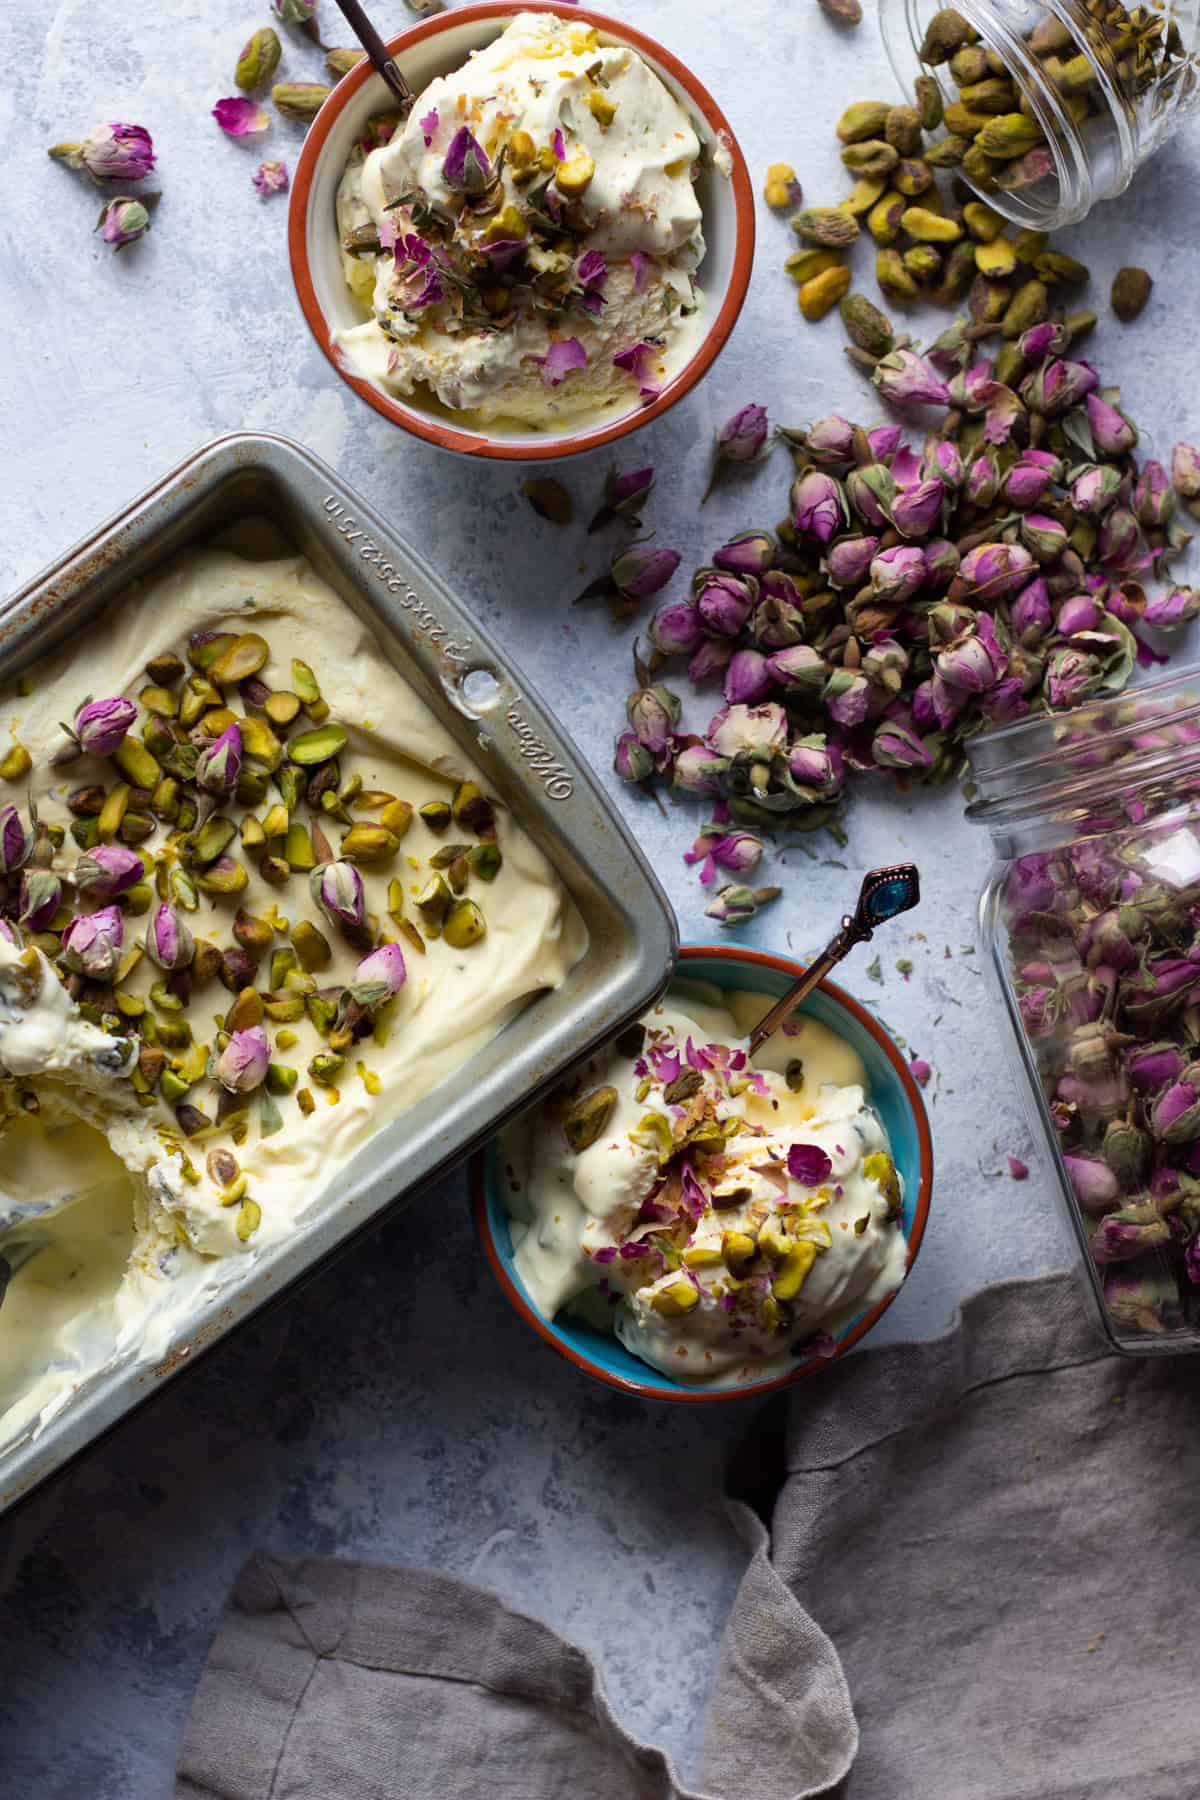 This no churn saffron ice cream is the best. Delicious homemade ice cream made with saffron, cardamom and pistachios is the perfect treat. 
